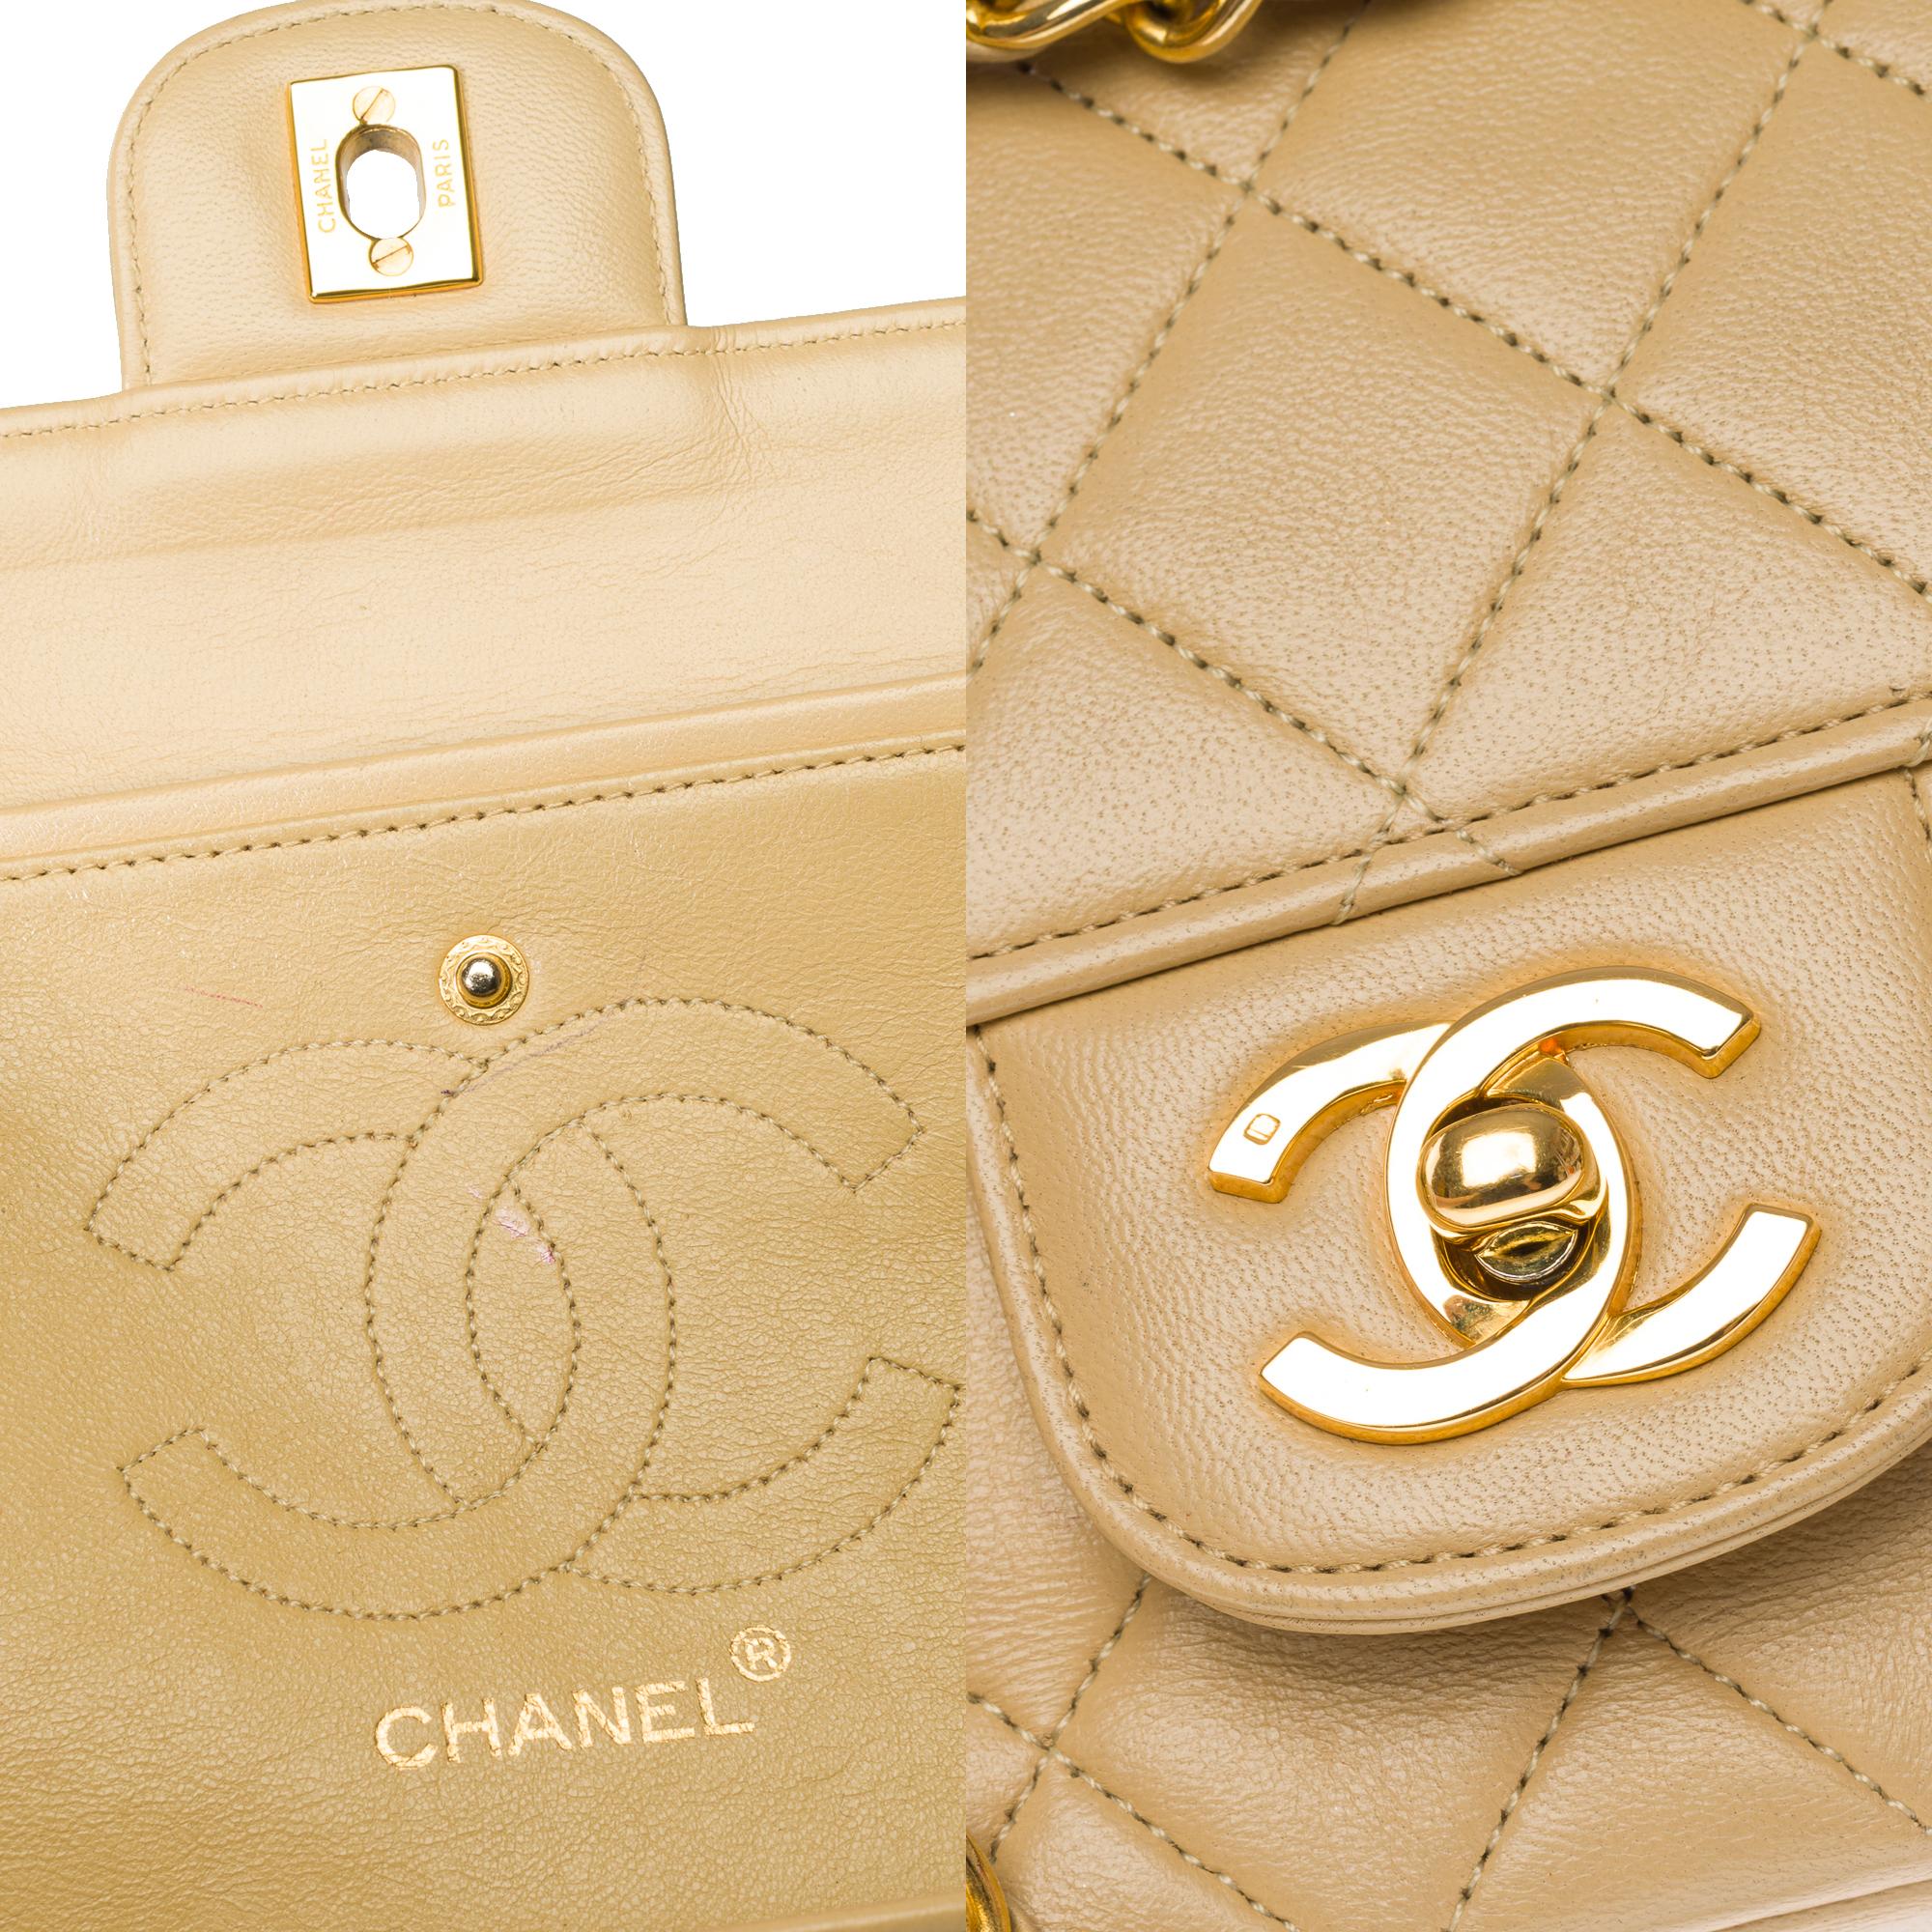 Chanel Timeless double flap shoulder bag in beige quilted lambskin leather, GHW 2